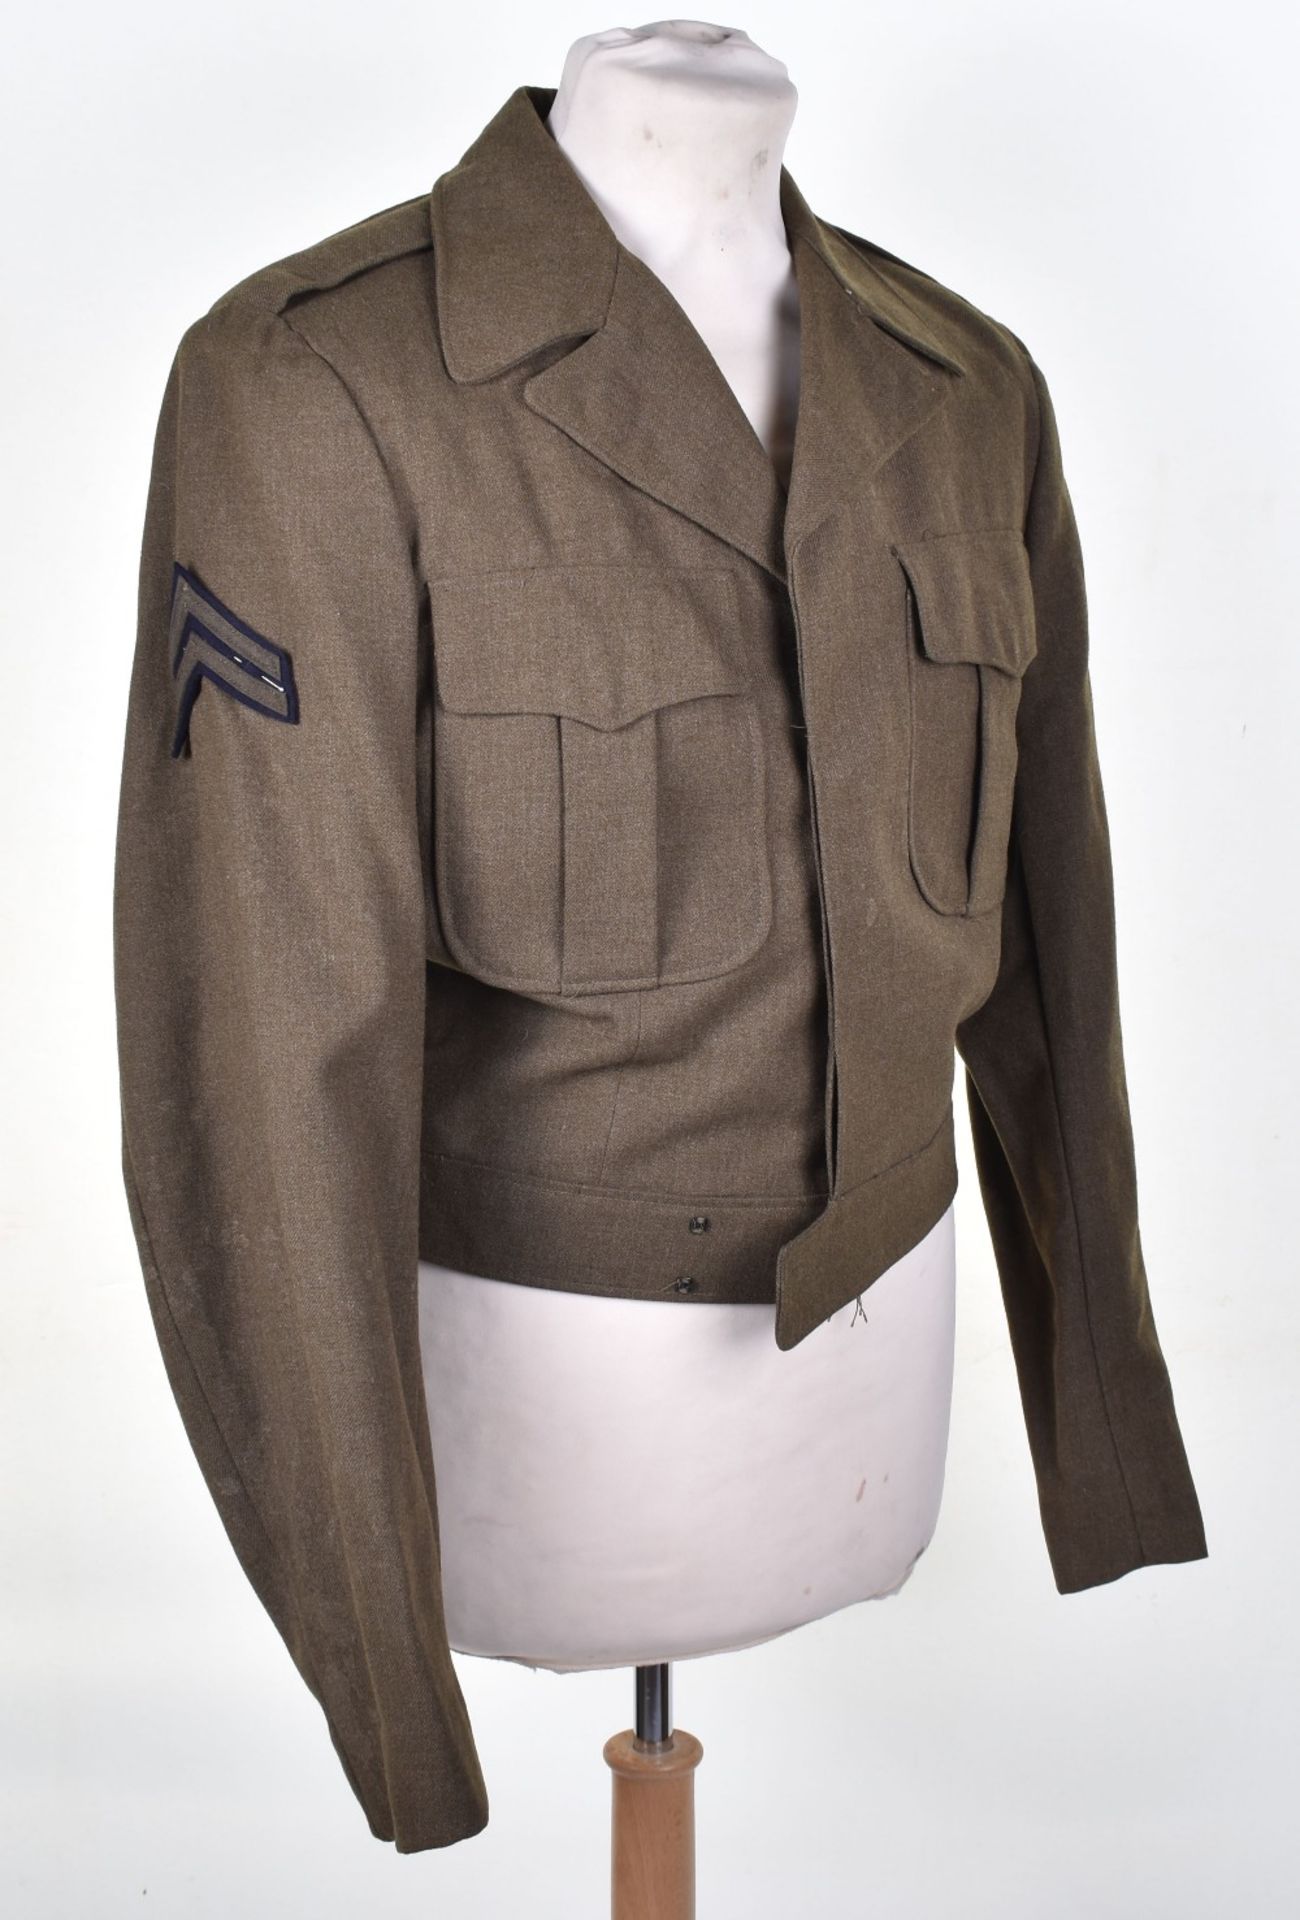 WW2 American Military Ike Jacket and Trousers - Image 6 of 12